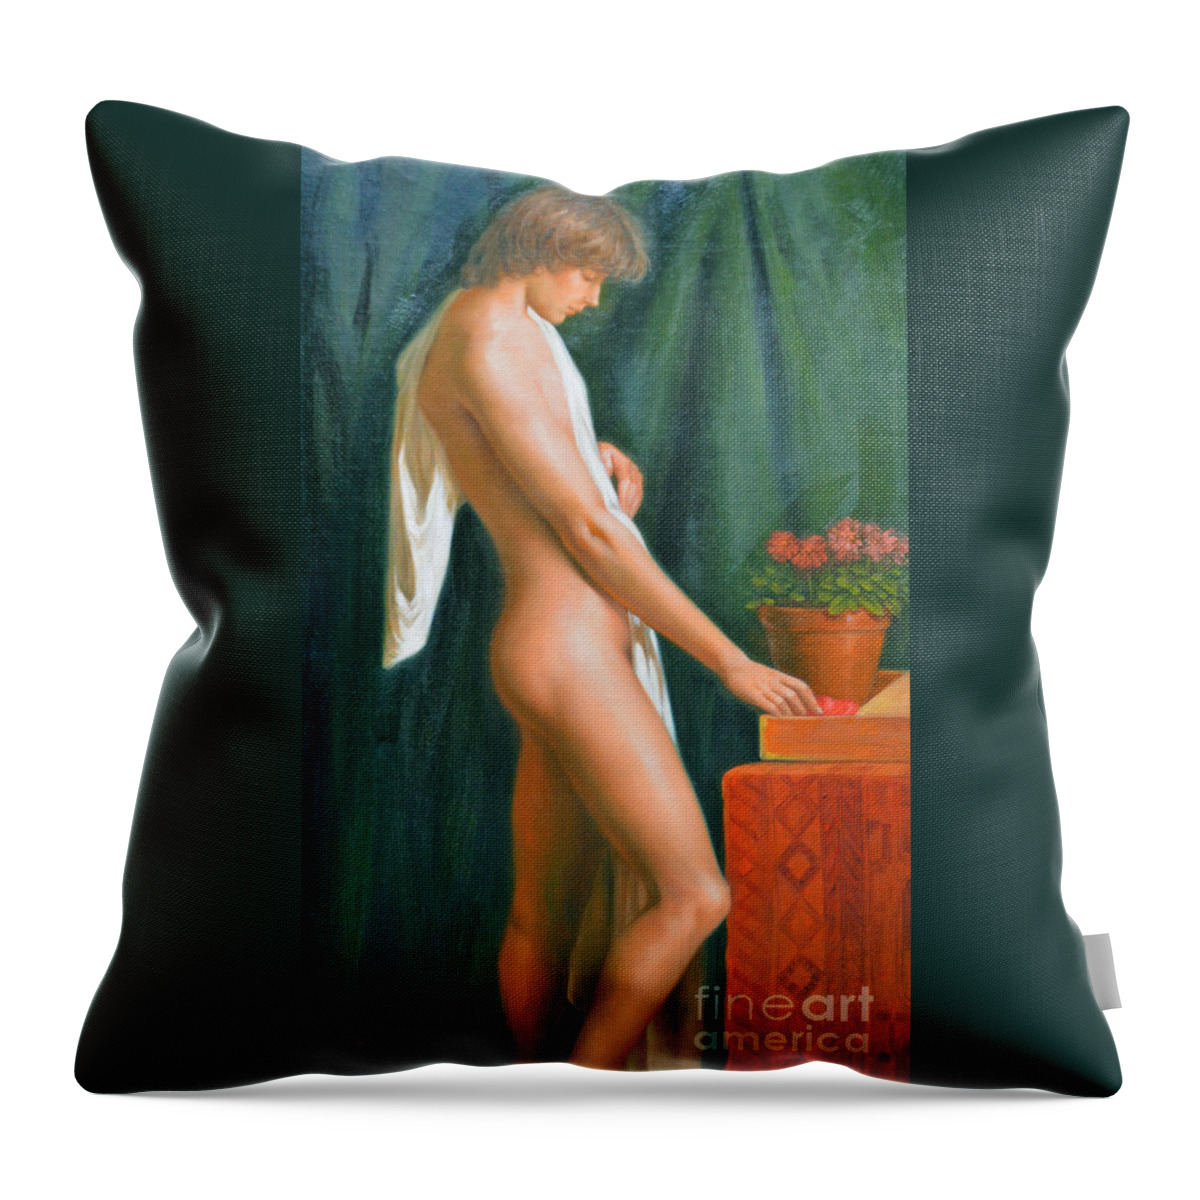 Oil Painting.art Throw Pillow featuring the painting Original Oil Painting Male Nude Boy Man On Canvas#16-2-5-16 by Hongtao Huang